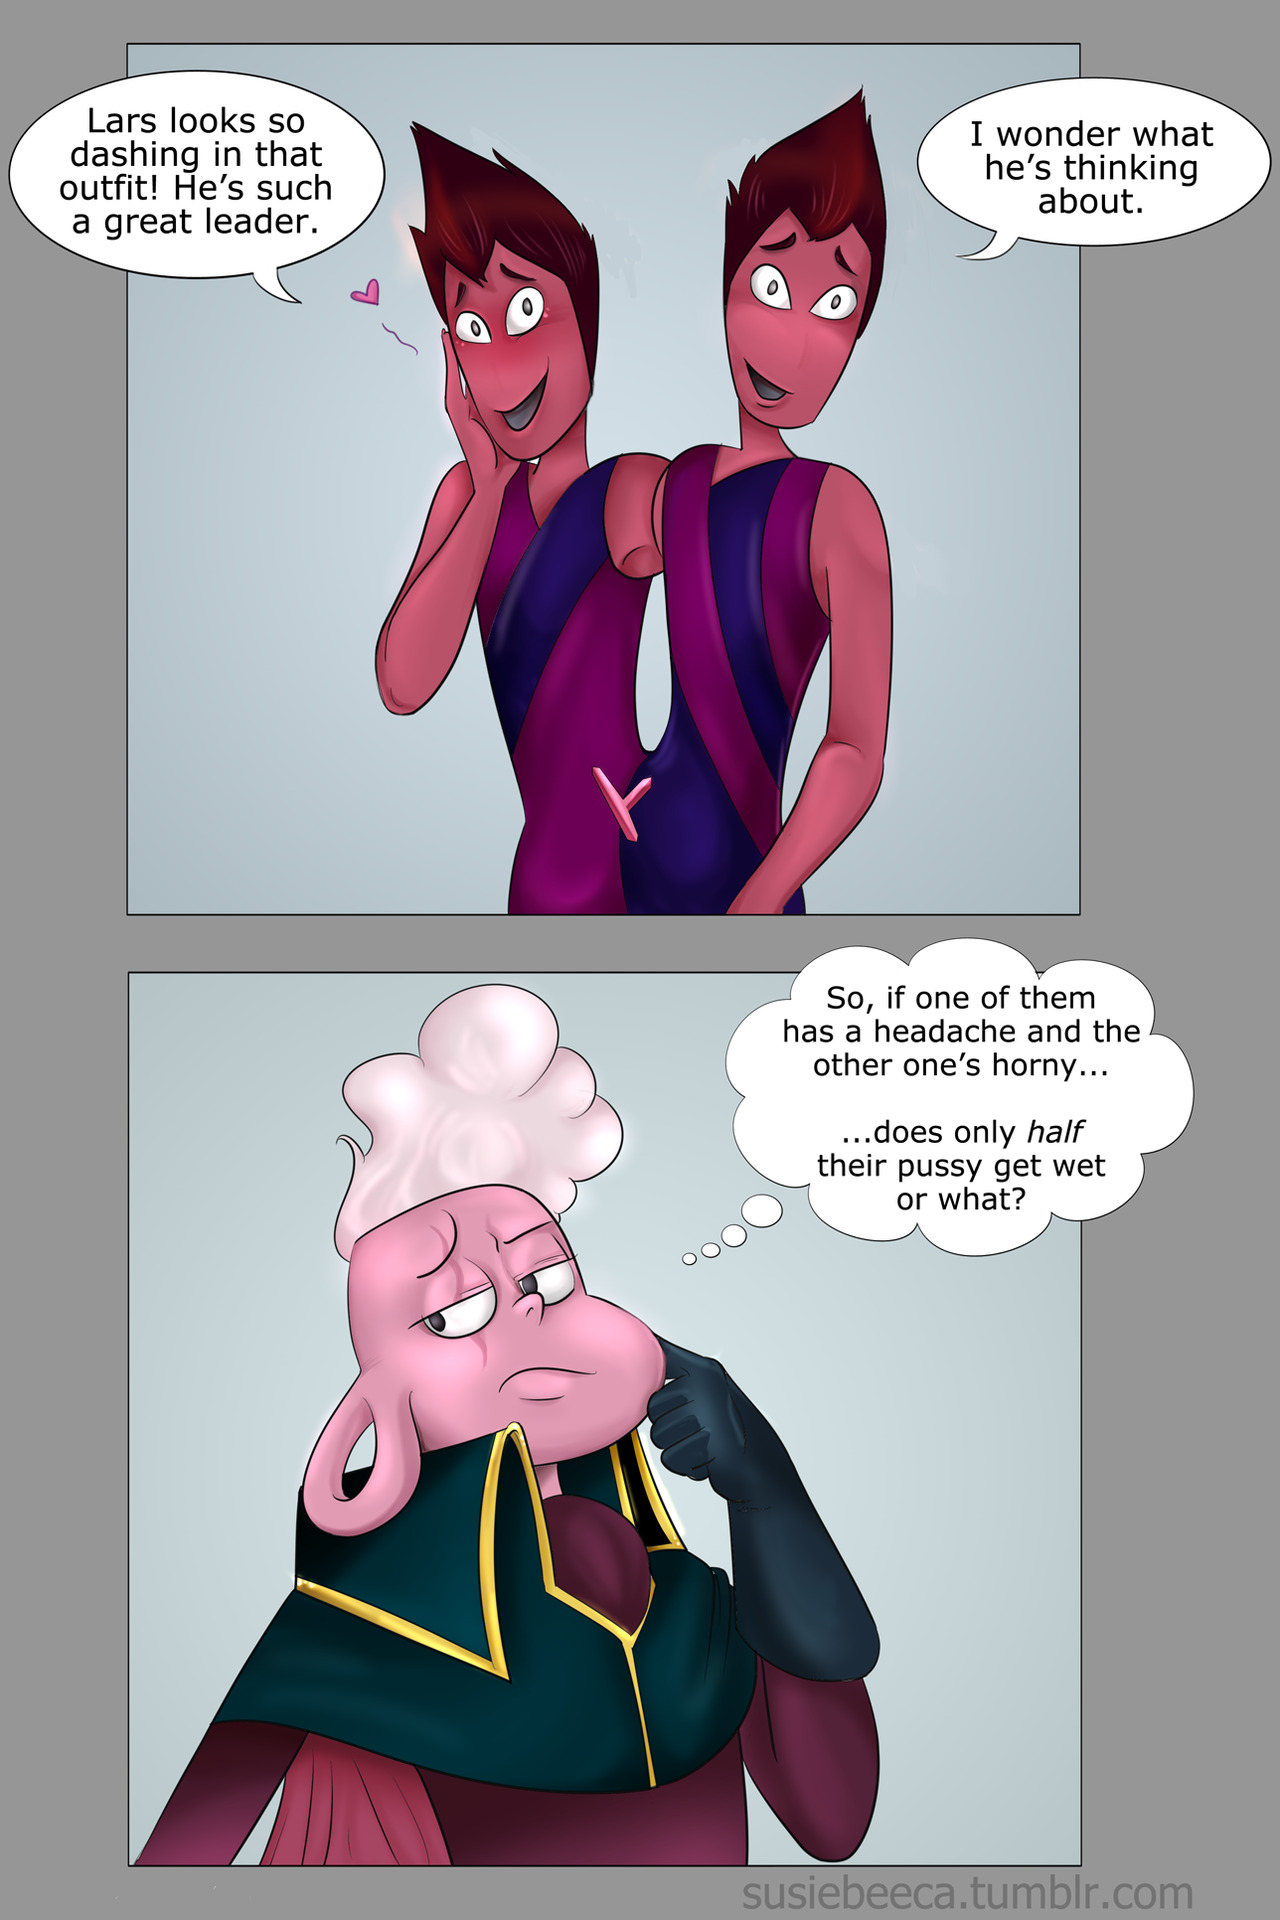 You never want to know what Lars is thinking about.(Also, am I the only one who likes